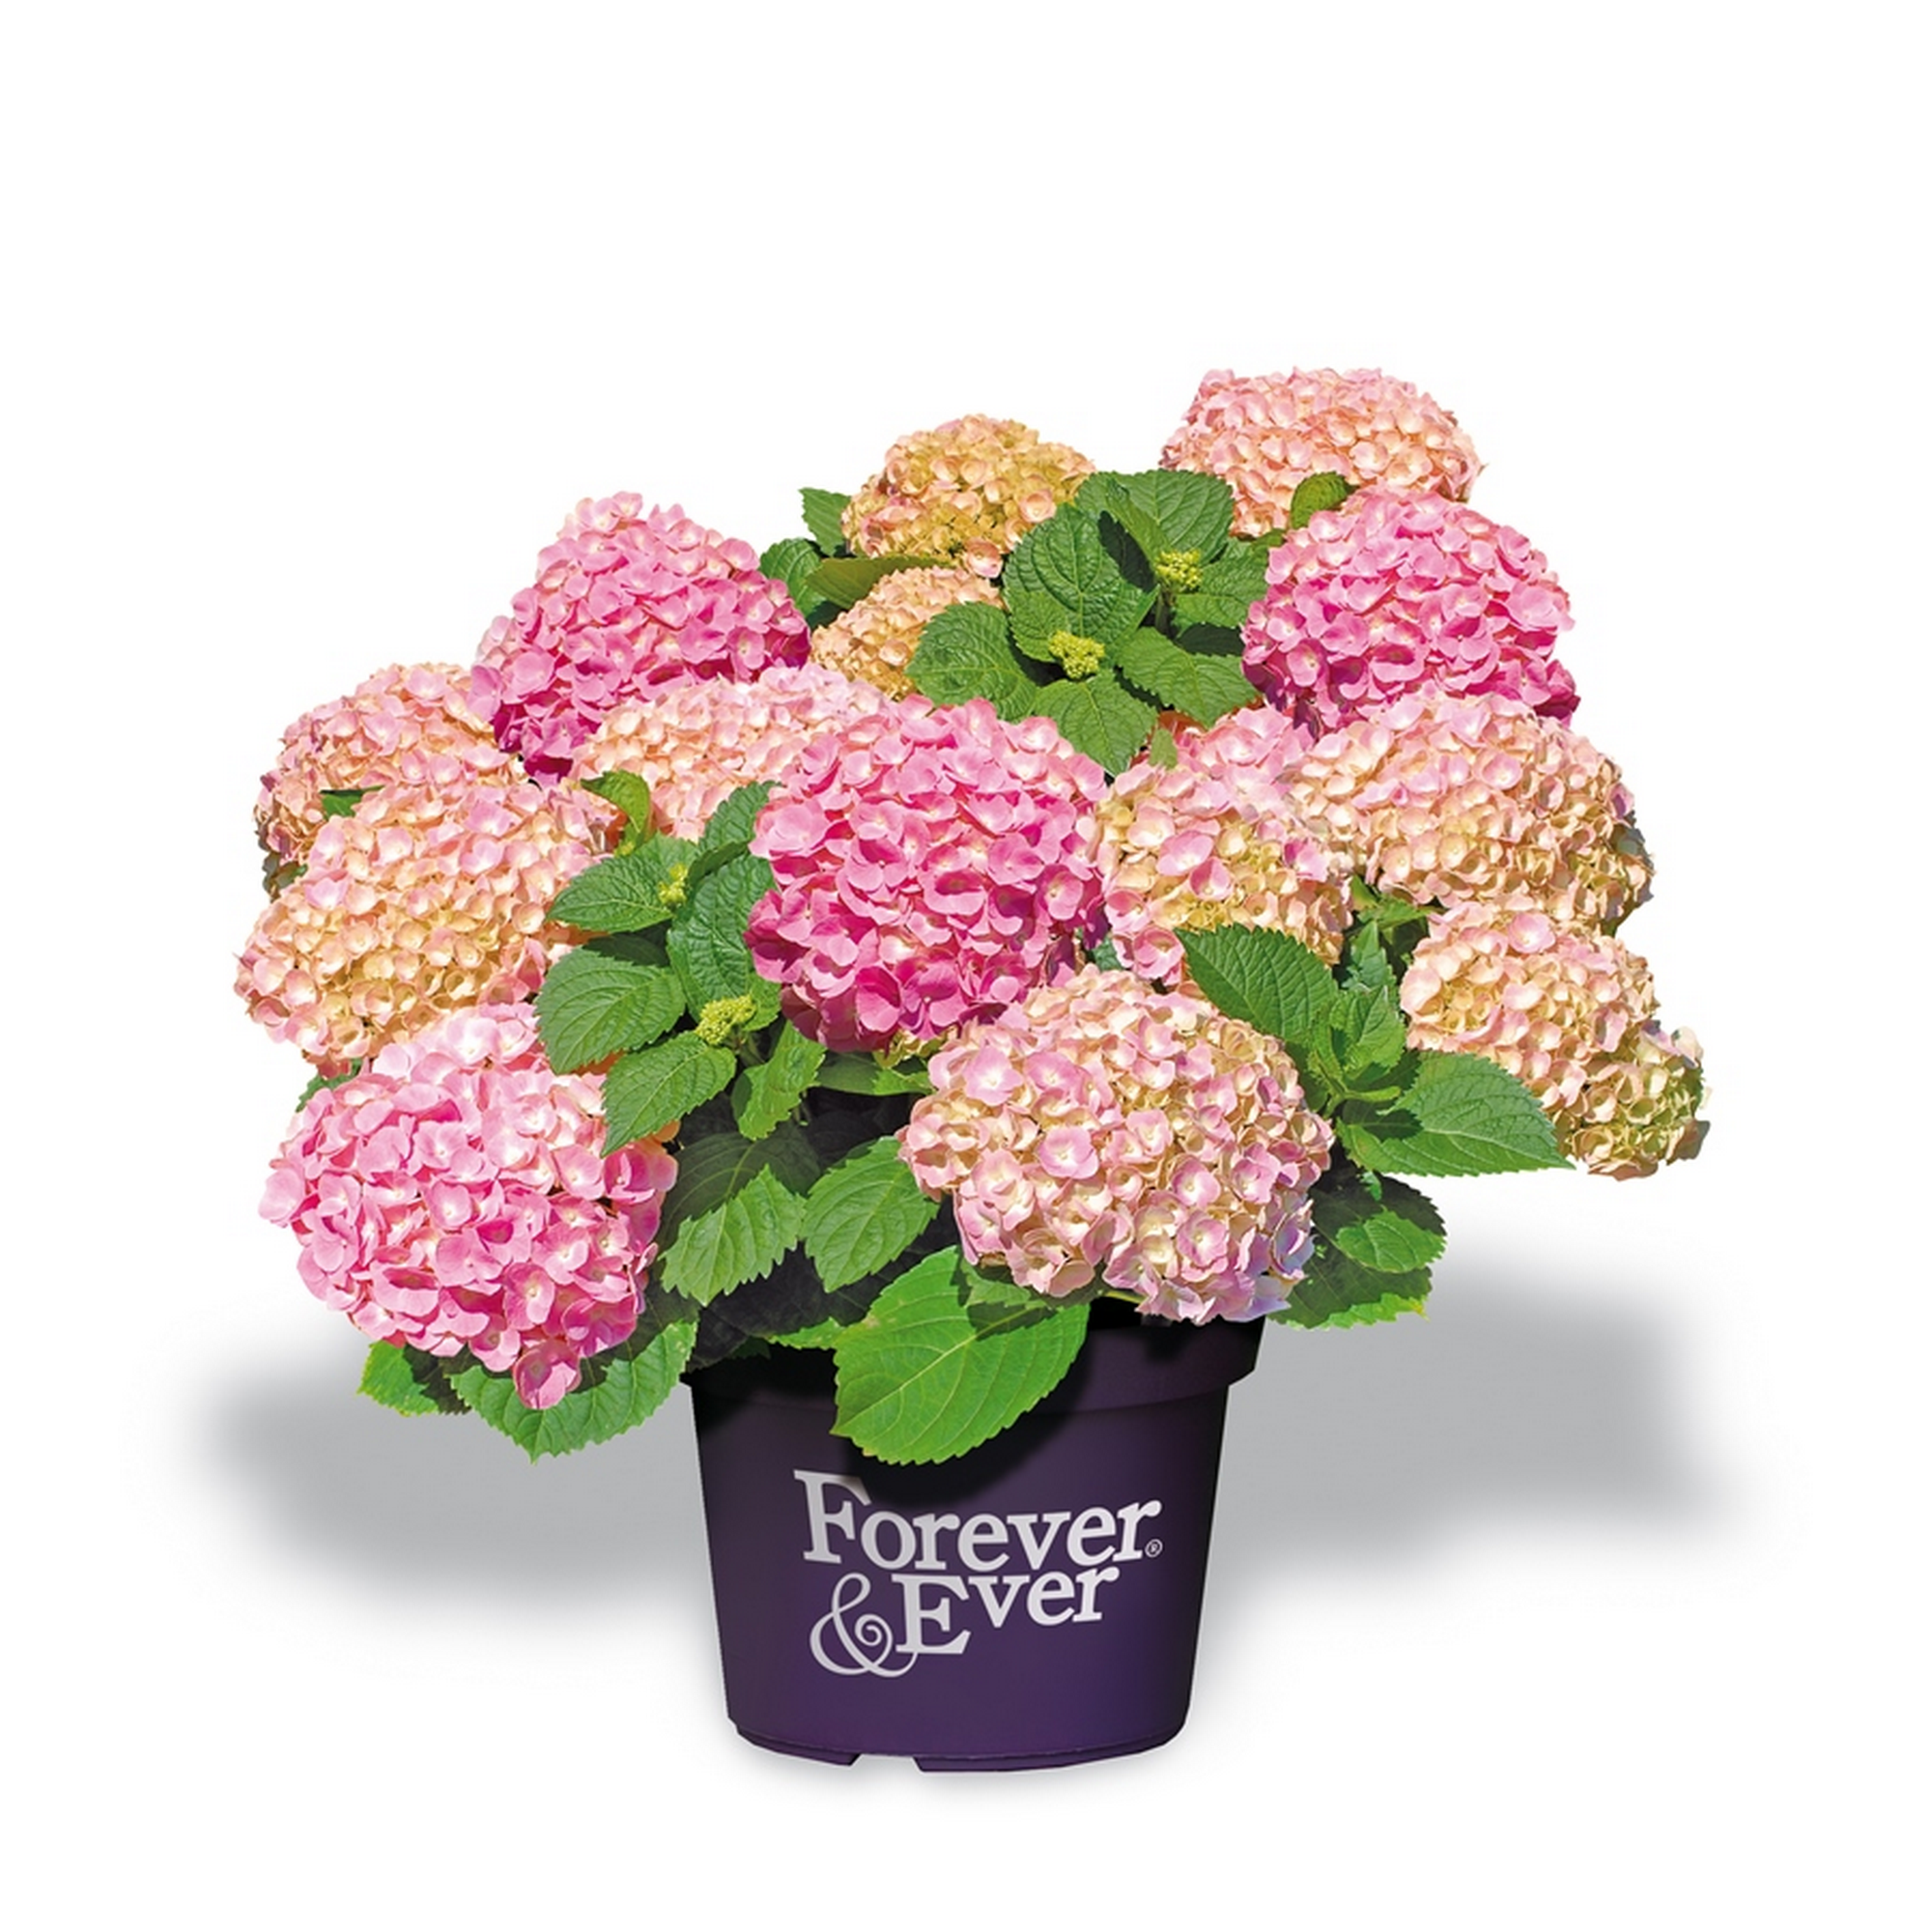 Hortensie 'Forever & Ever®' rosa, Topf Ø 23 cm + product picture